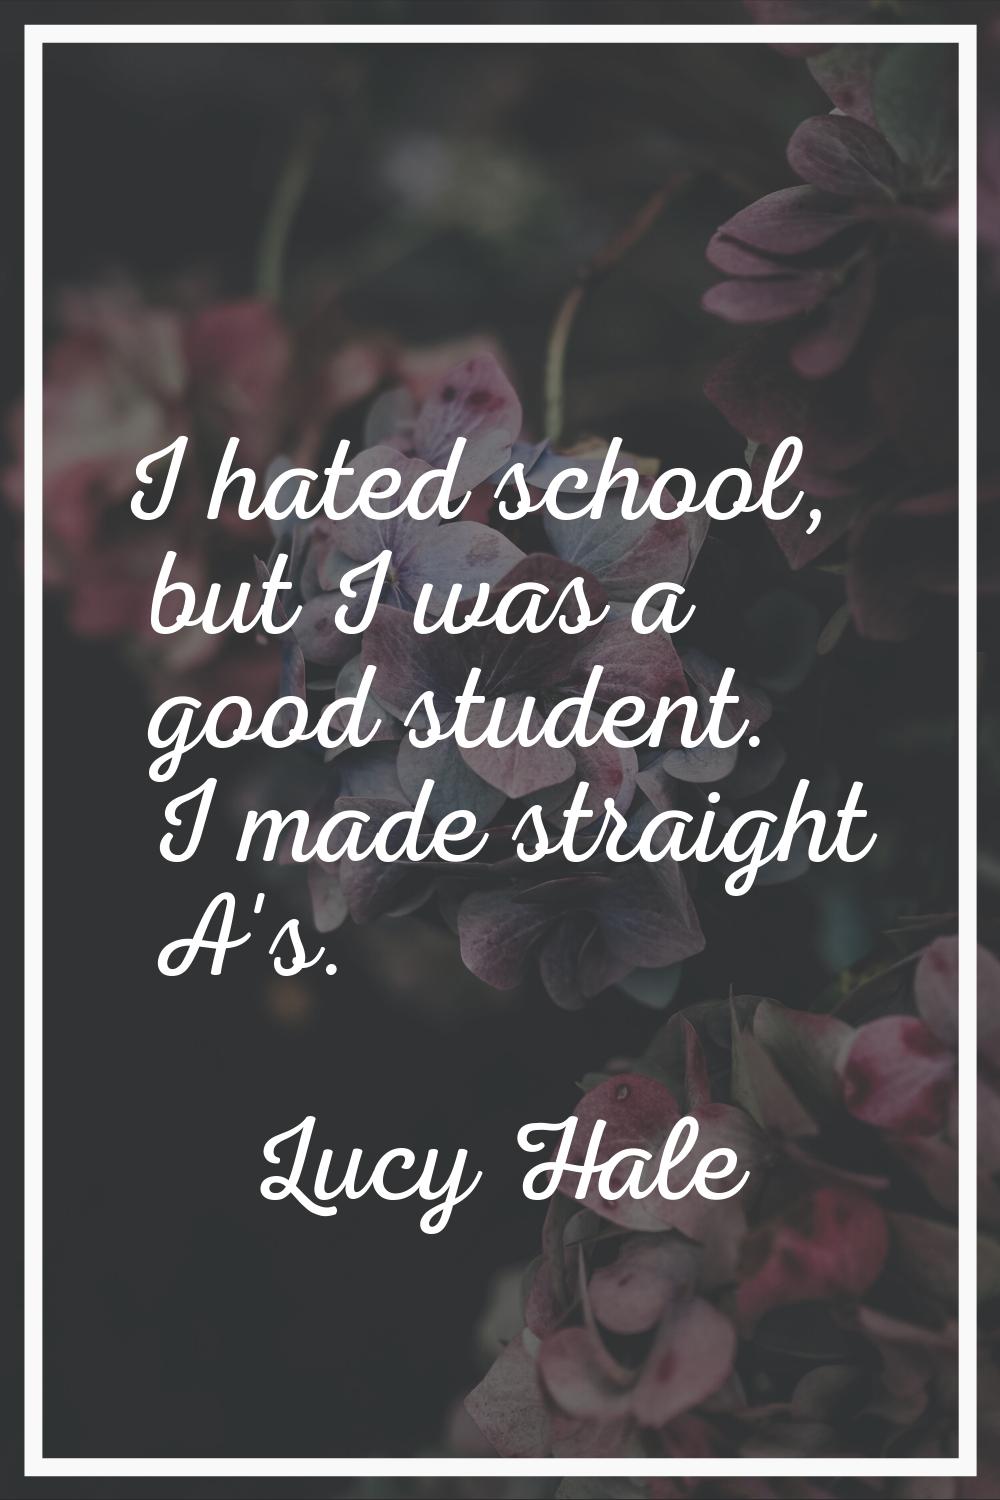 I hated school, but I was a good student. I made straight A's.